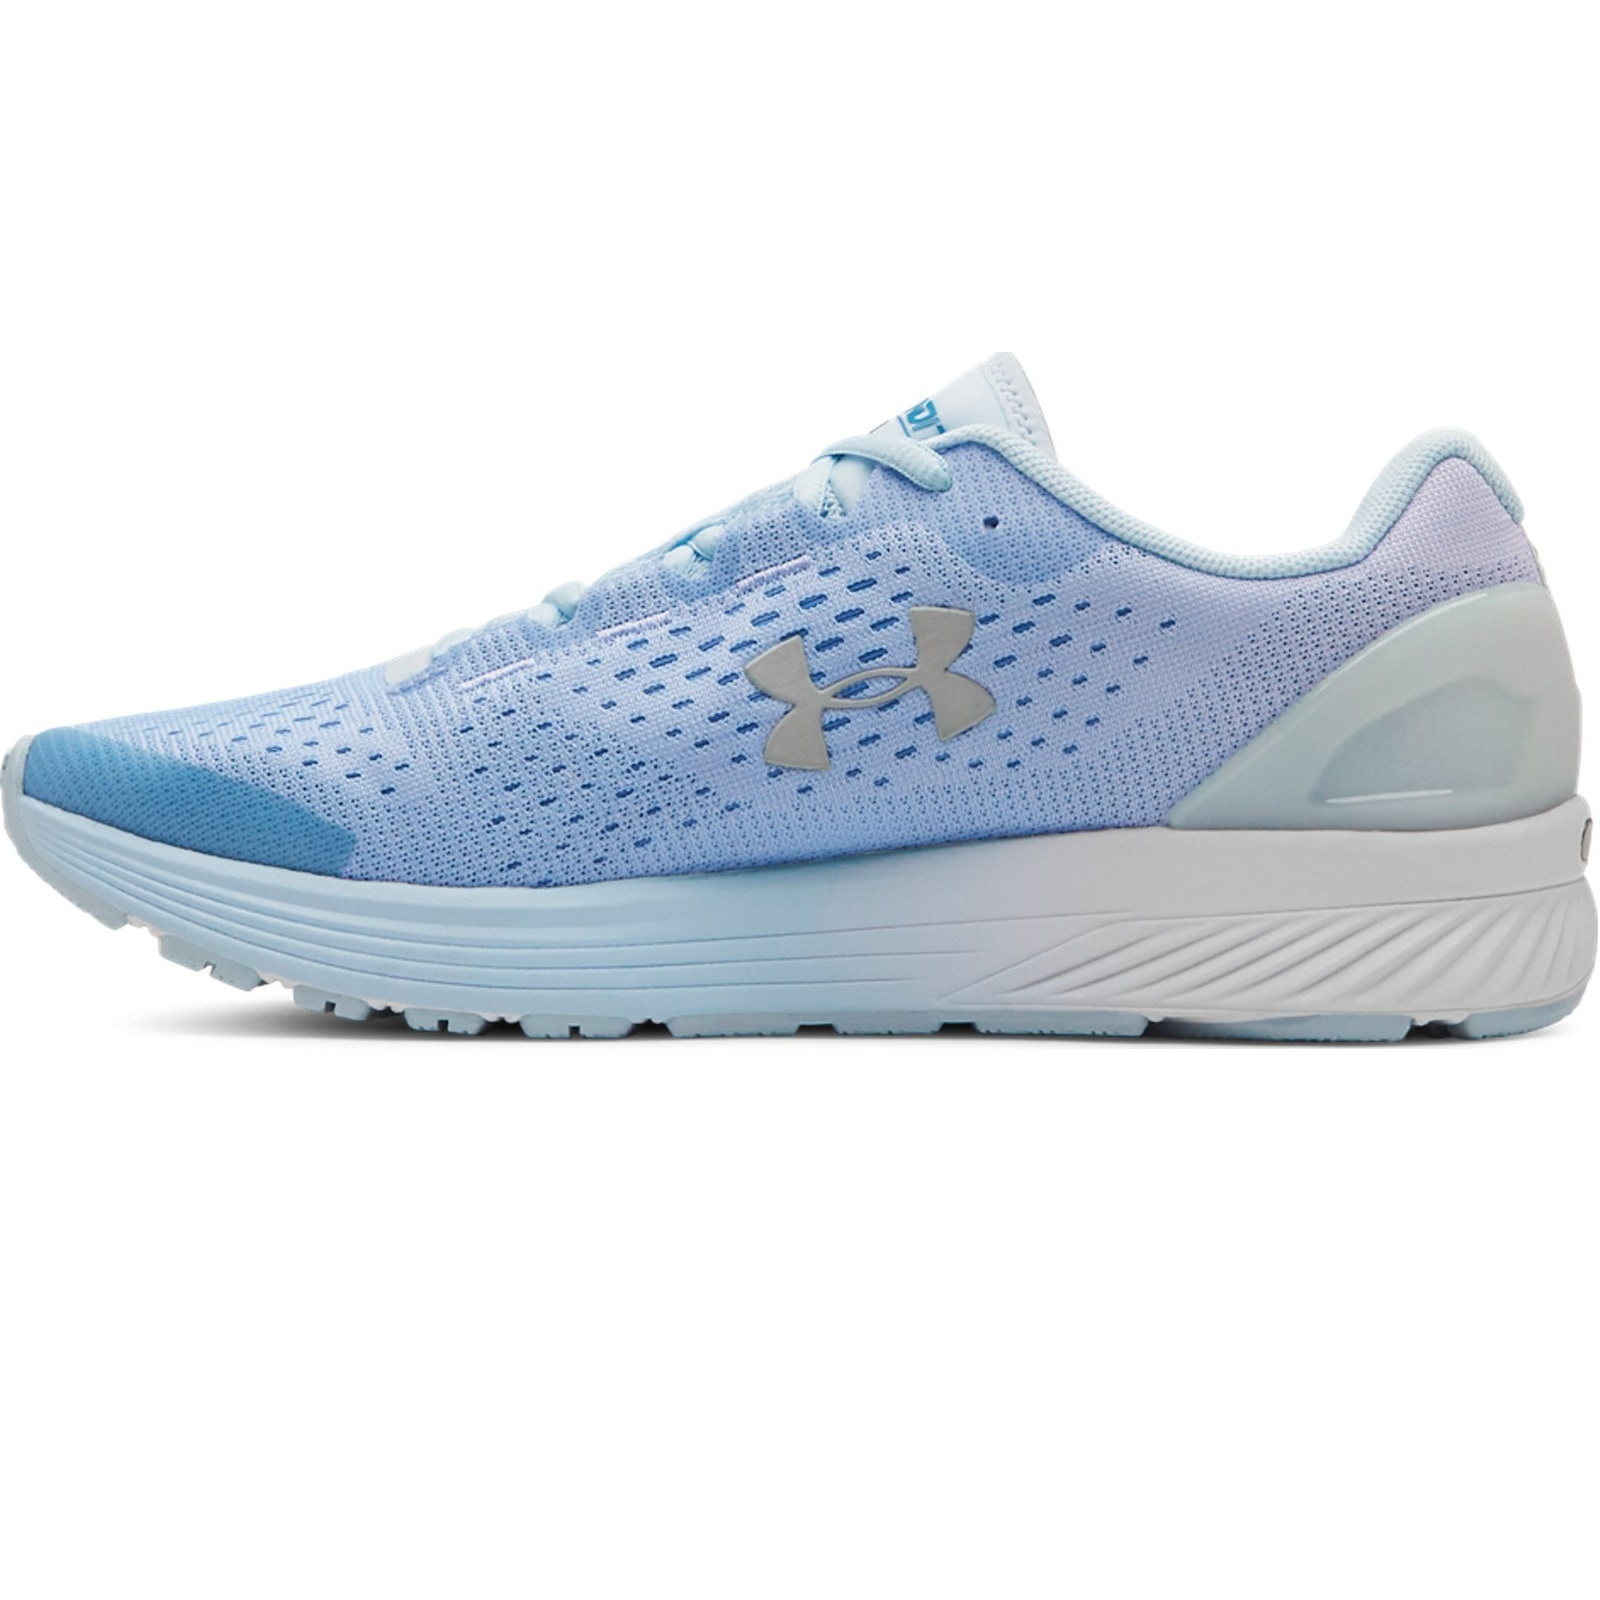 Incaltaminte De Alergare -  under armour Charged Bandit 4 Running Shoes 0357